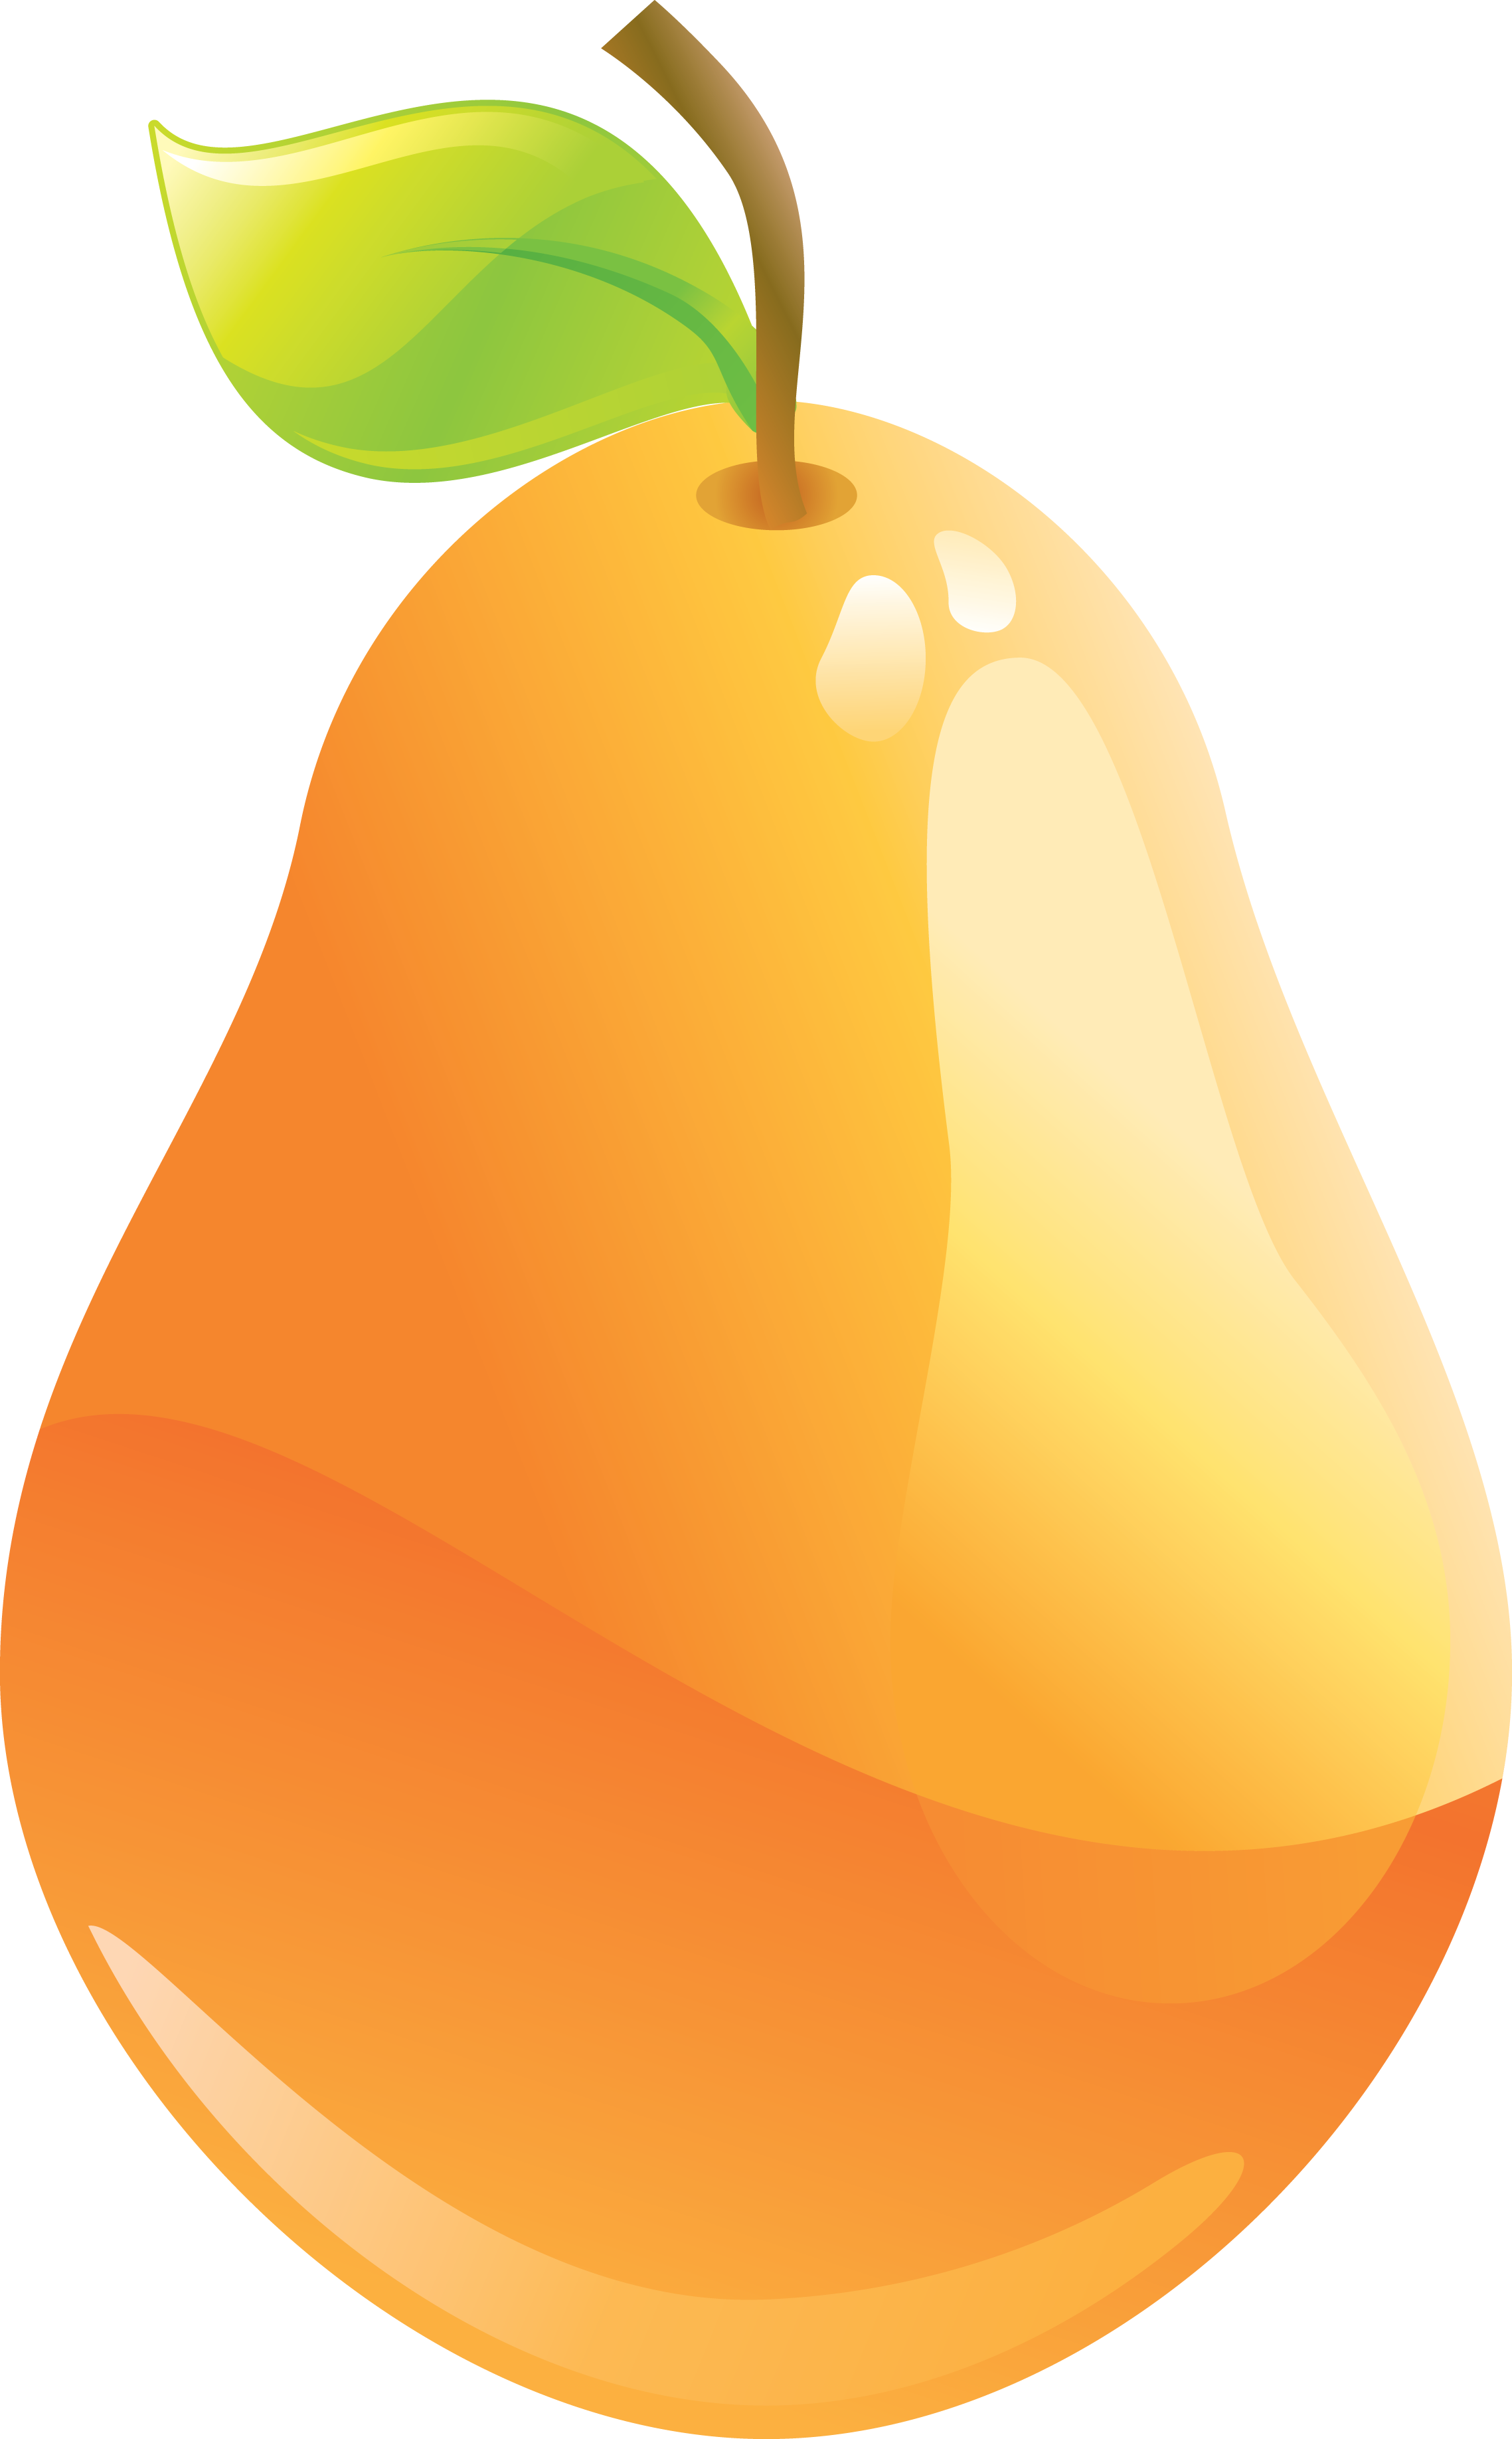 Yellow Pear Png Image - Pear, Transparent background PNG HD thumbnail